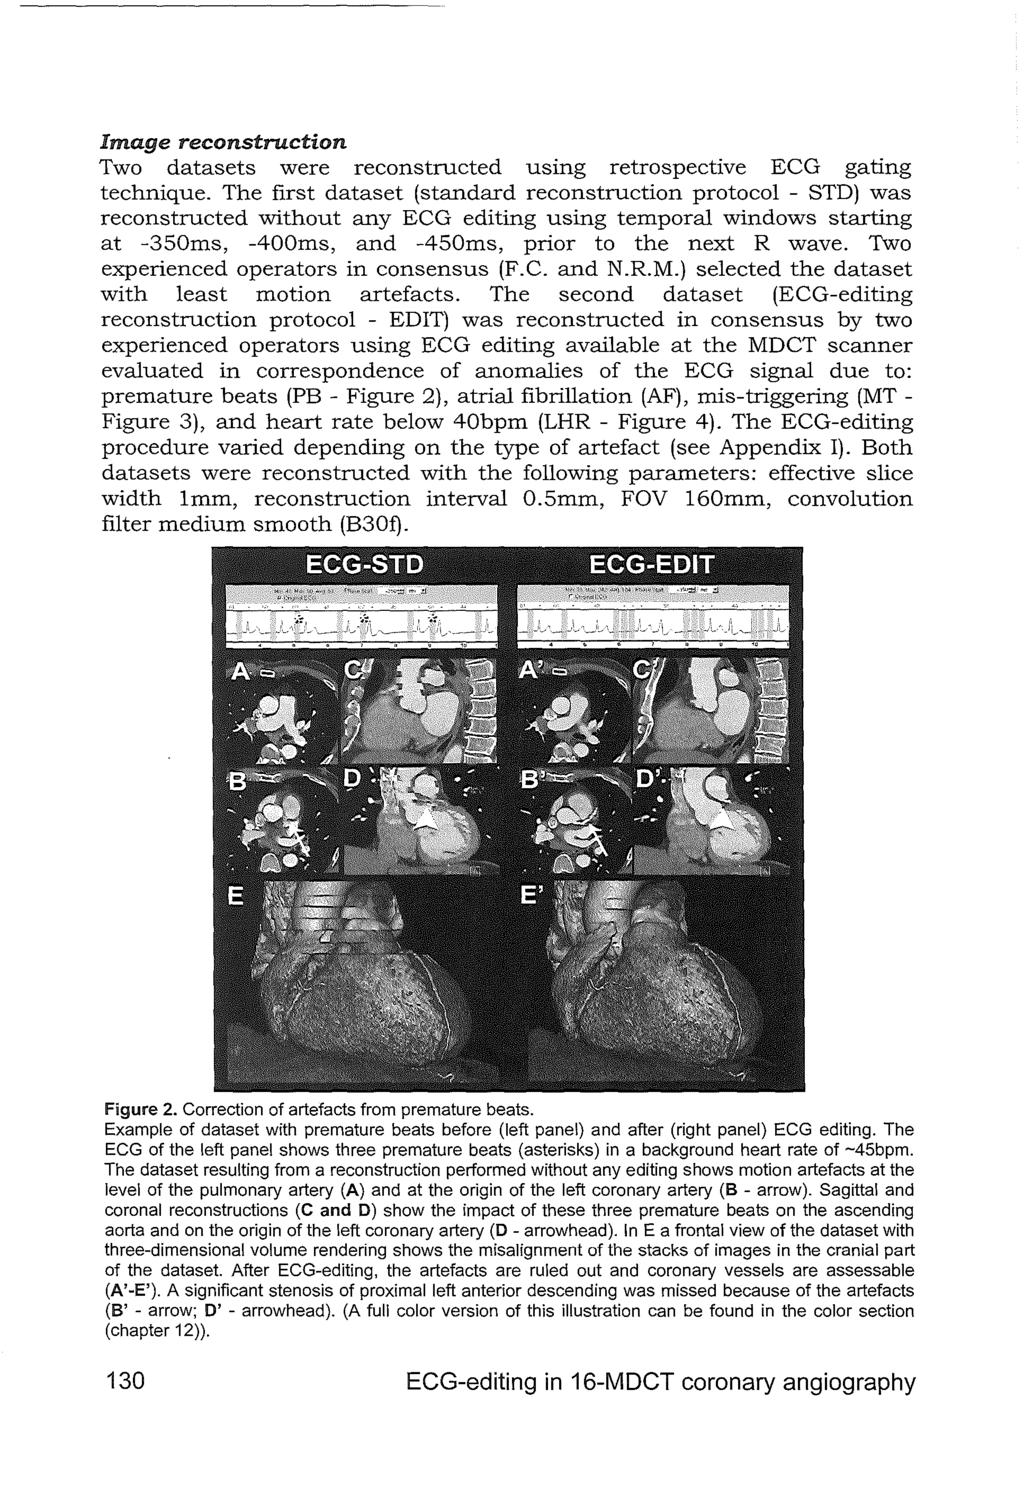 Image reconstruction Two datasets were reconstructed using retrospective ECG gating technique.